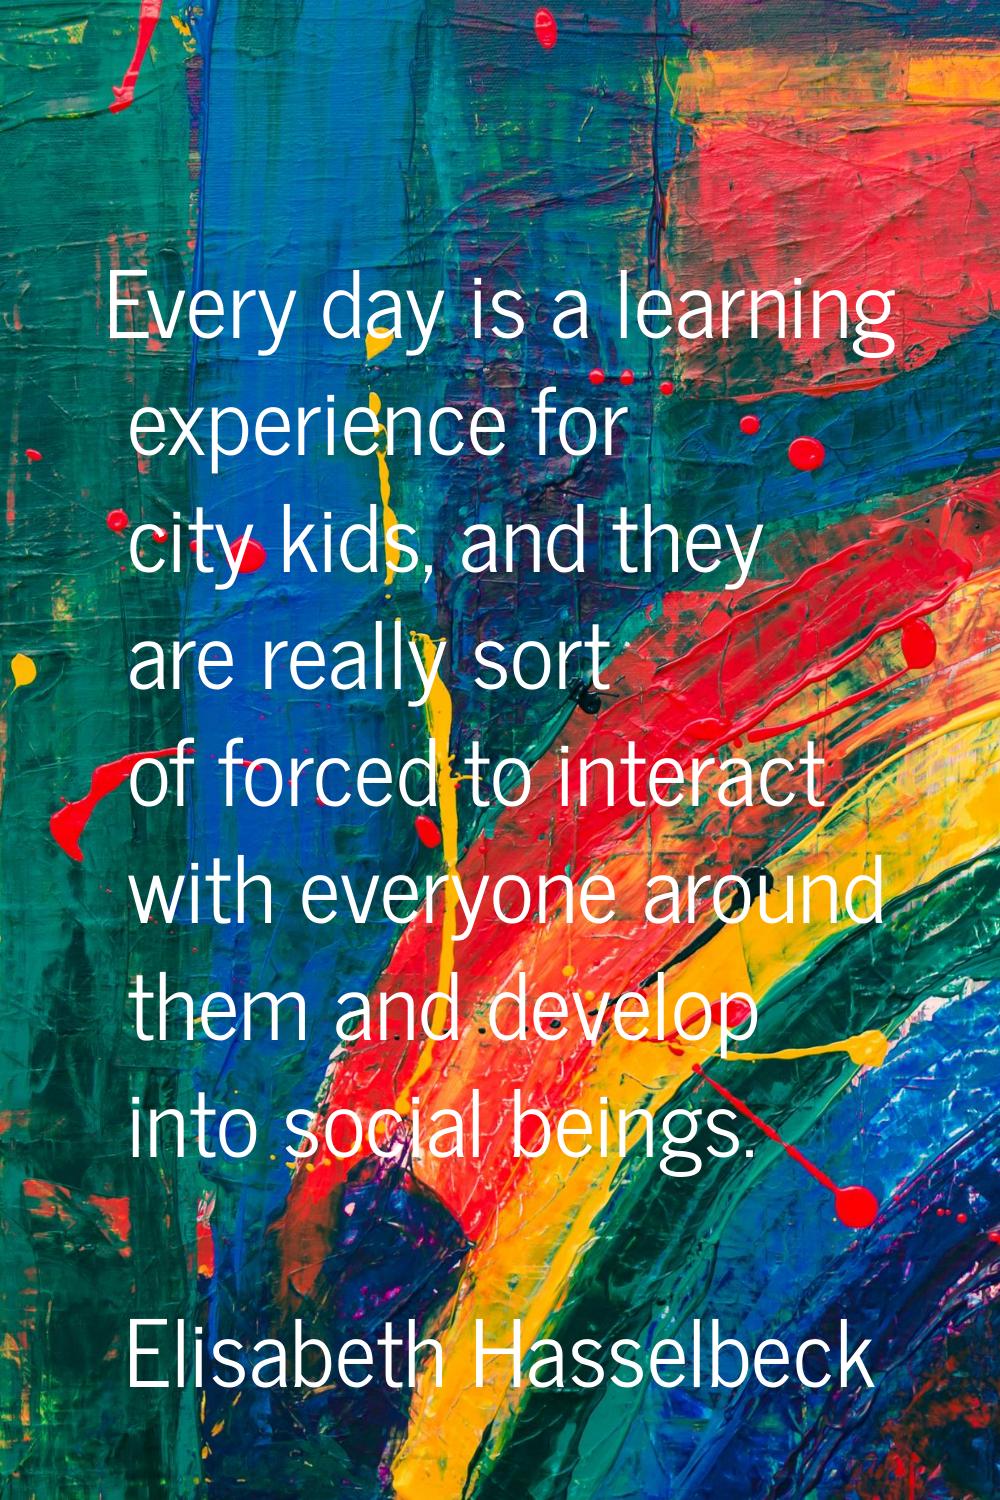 Every day is a learning experience for city kids, and they are really sort of forced to interact wi